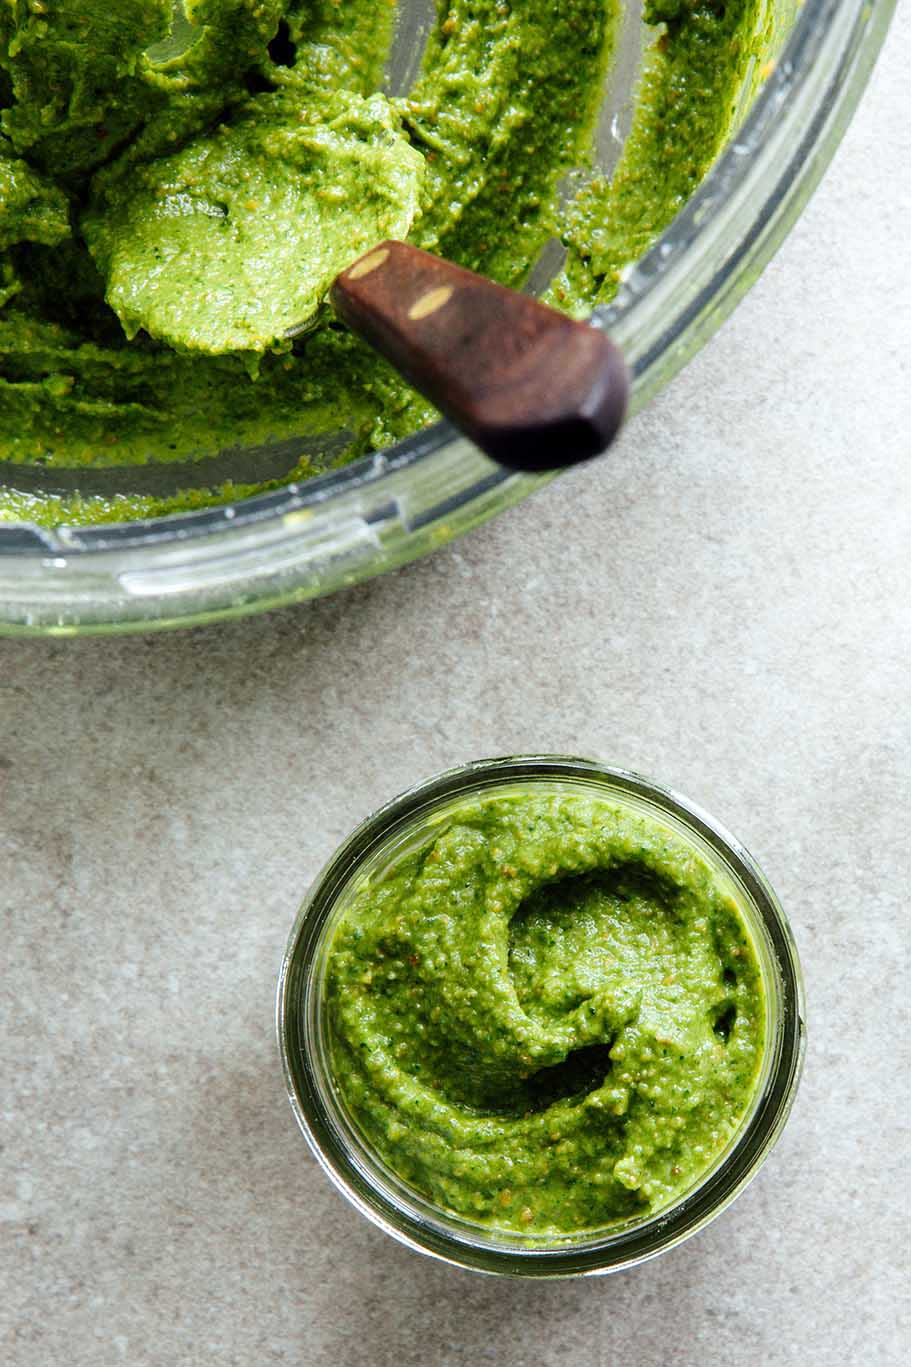 Small jars of pesto next to the bowl of a food processor with more pesto and a spoon inside of it.